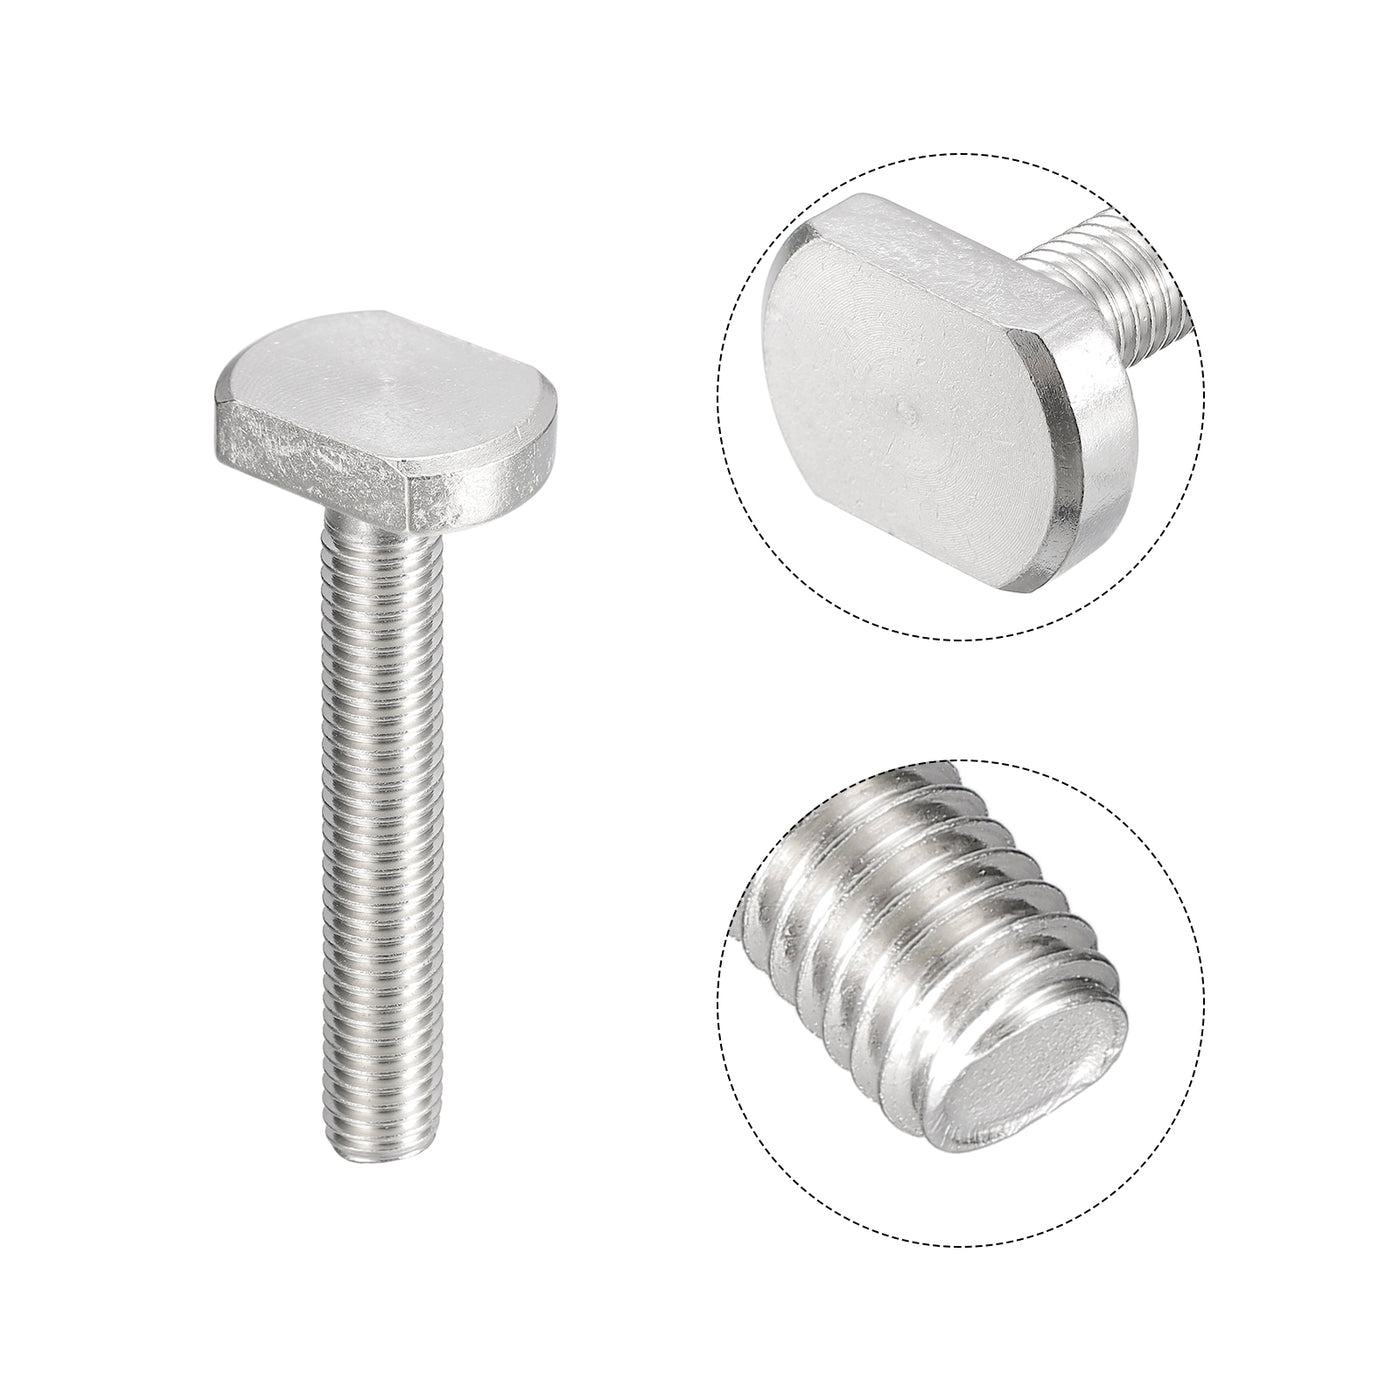 uxcell Uxcell T-Slot Bolts, 2pcs M10x60mm Drop-in Stud Sliding Bolts 304 Stainless Steel